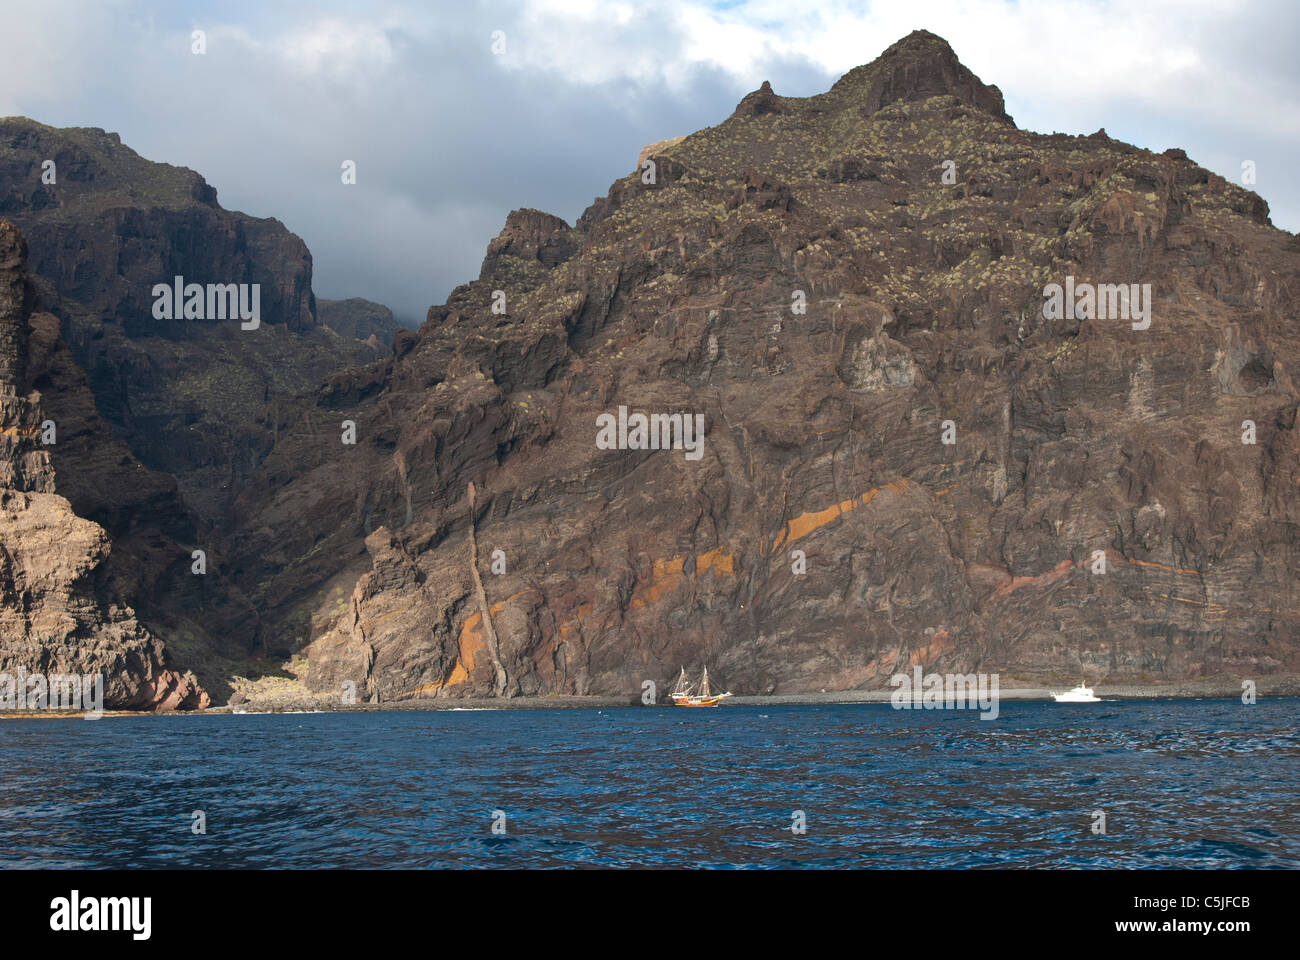 Cliffs of Los Gigantes, Tenerife, Canary Islands, Spain Stock Photo